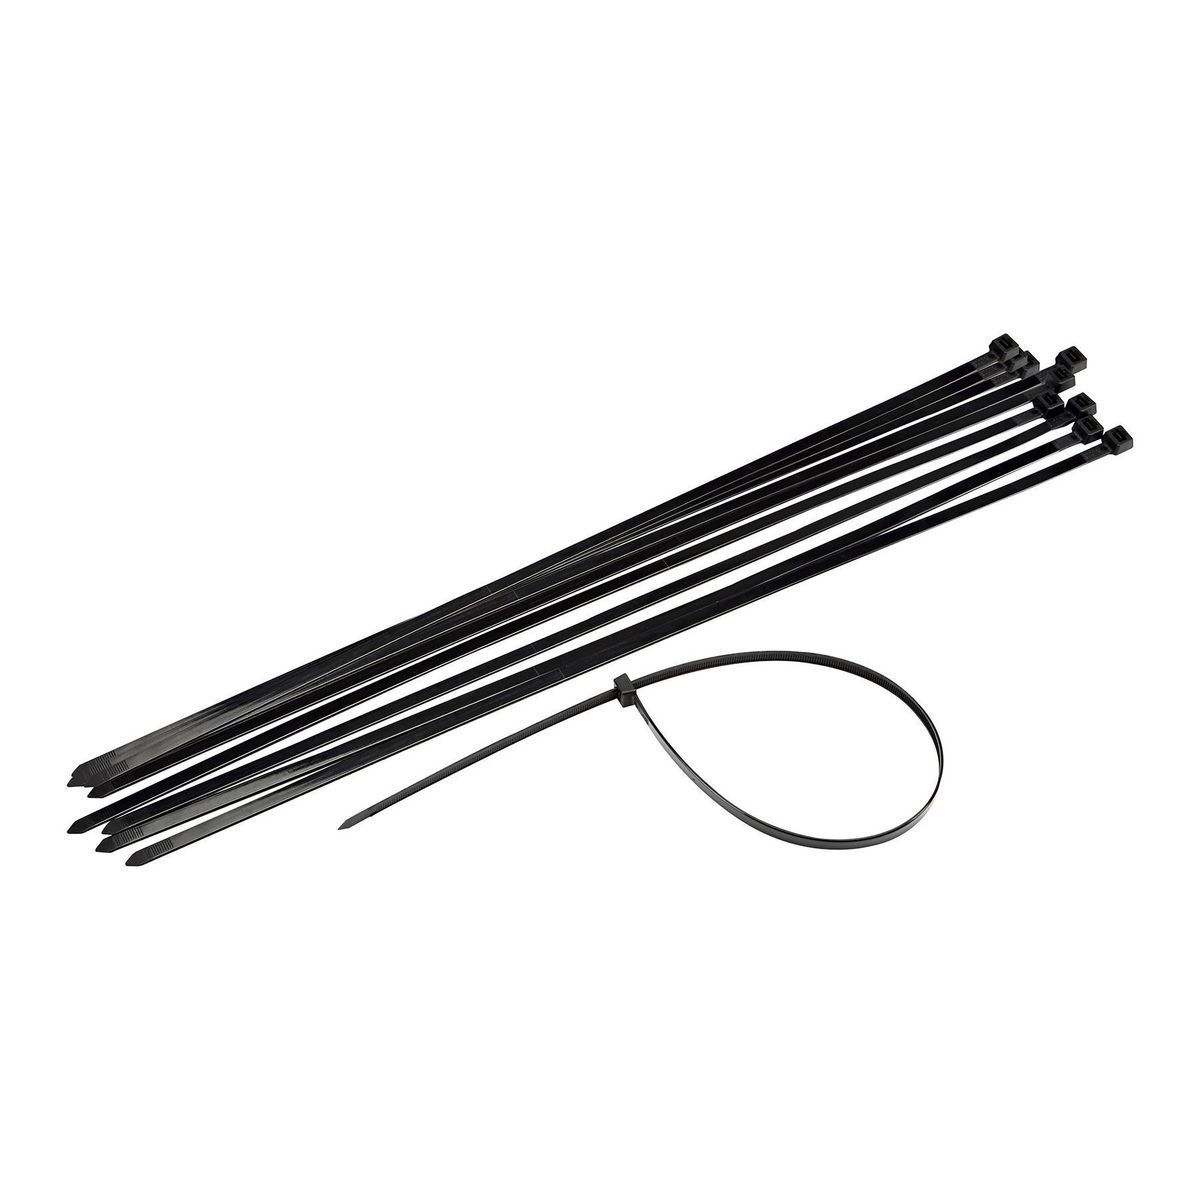 STOREHOUSE 24 in. Cable Ties, 10 Pack